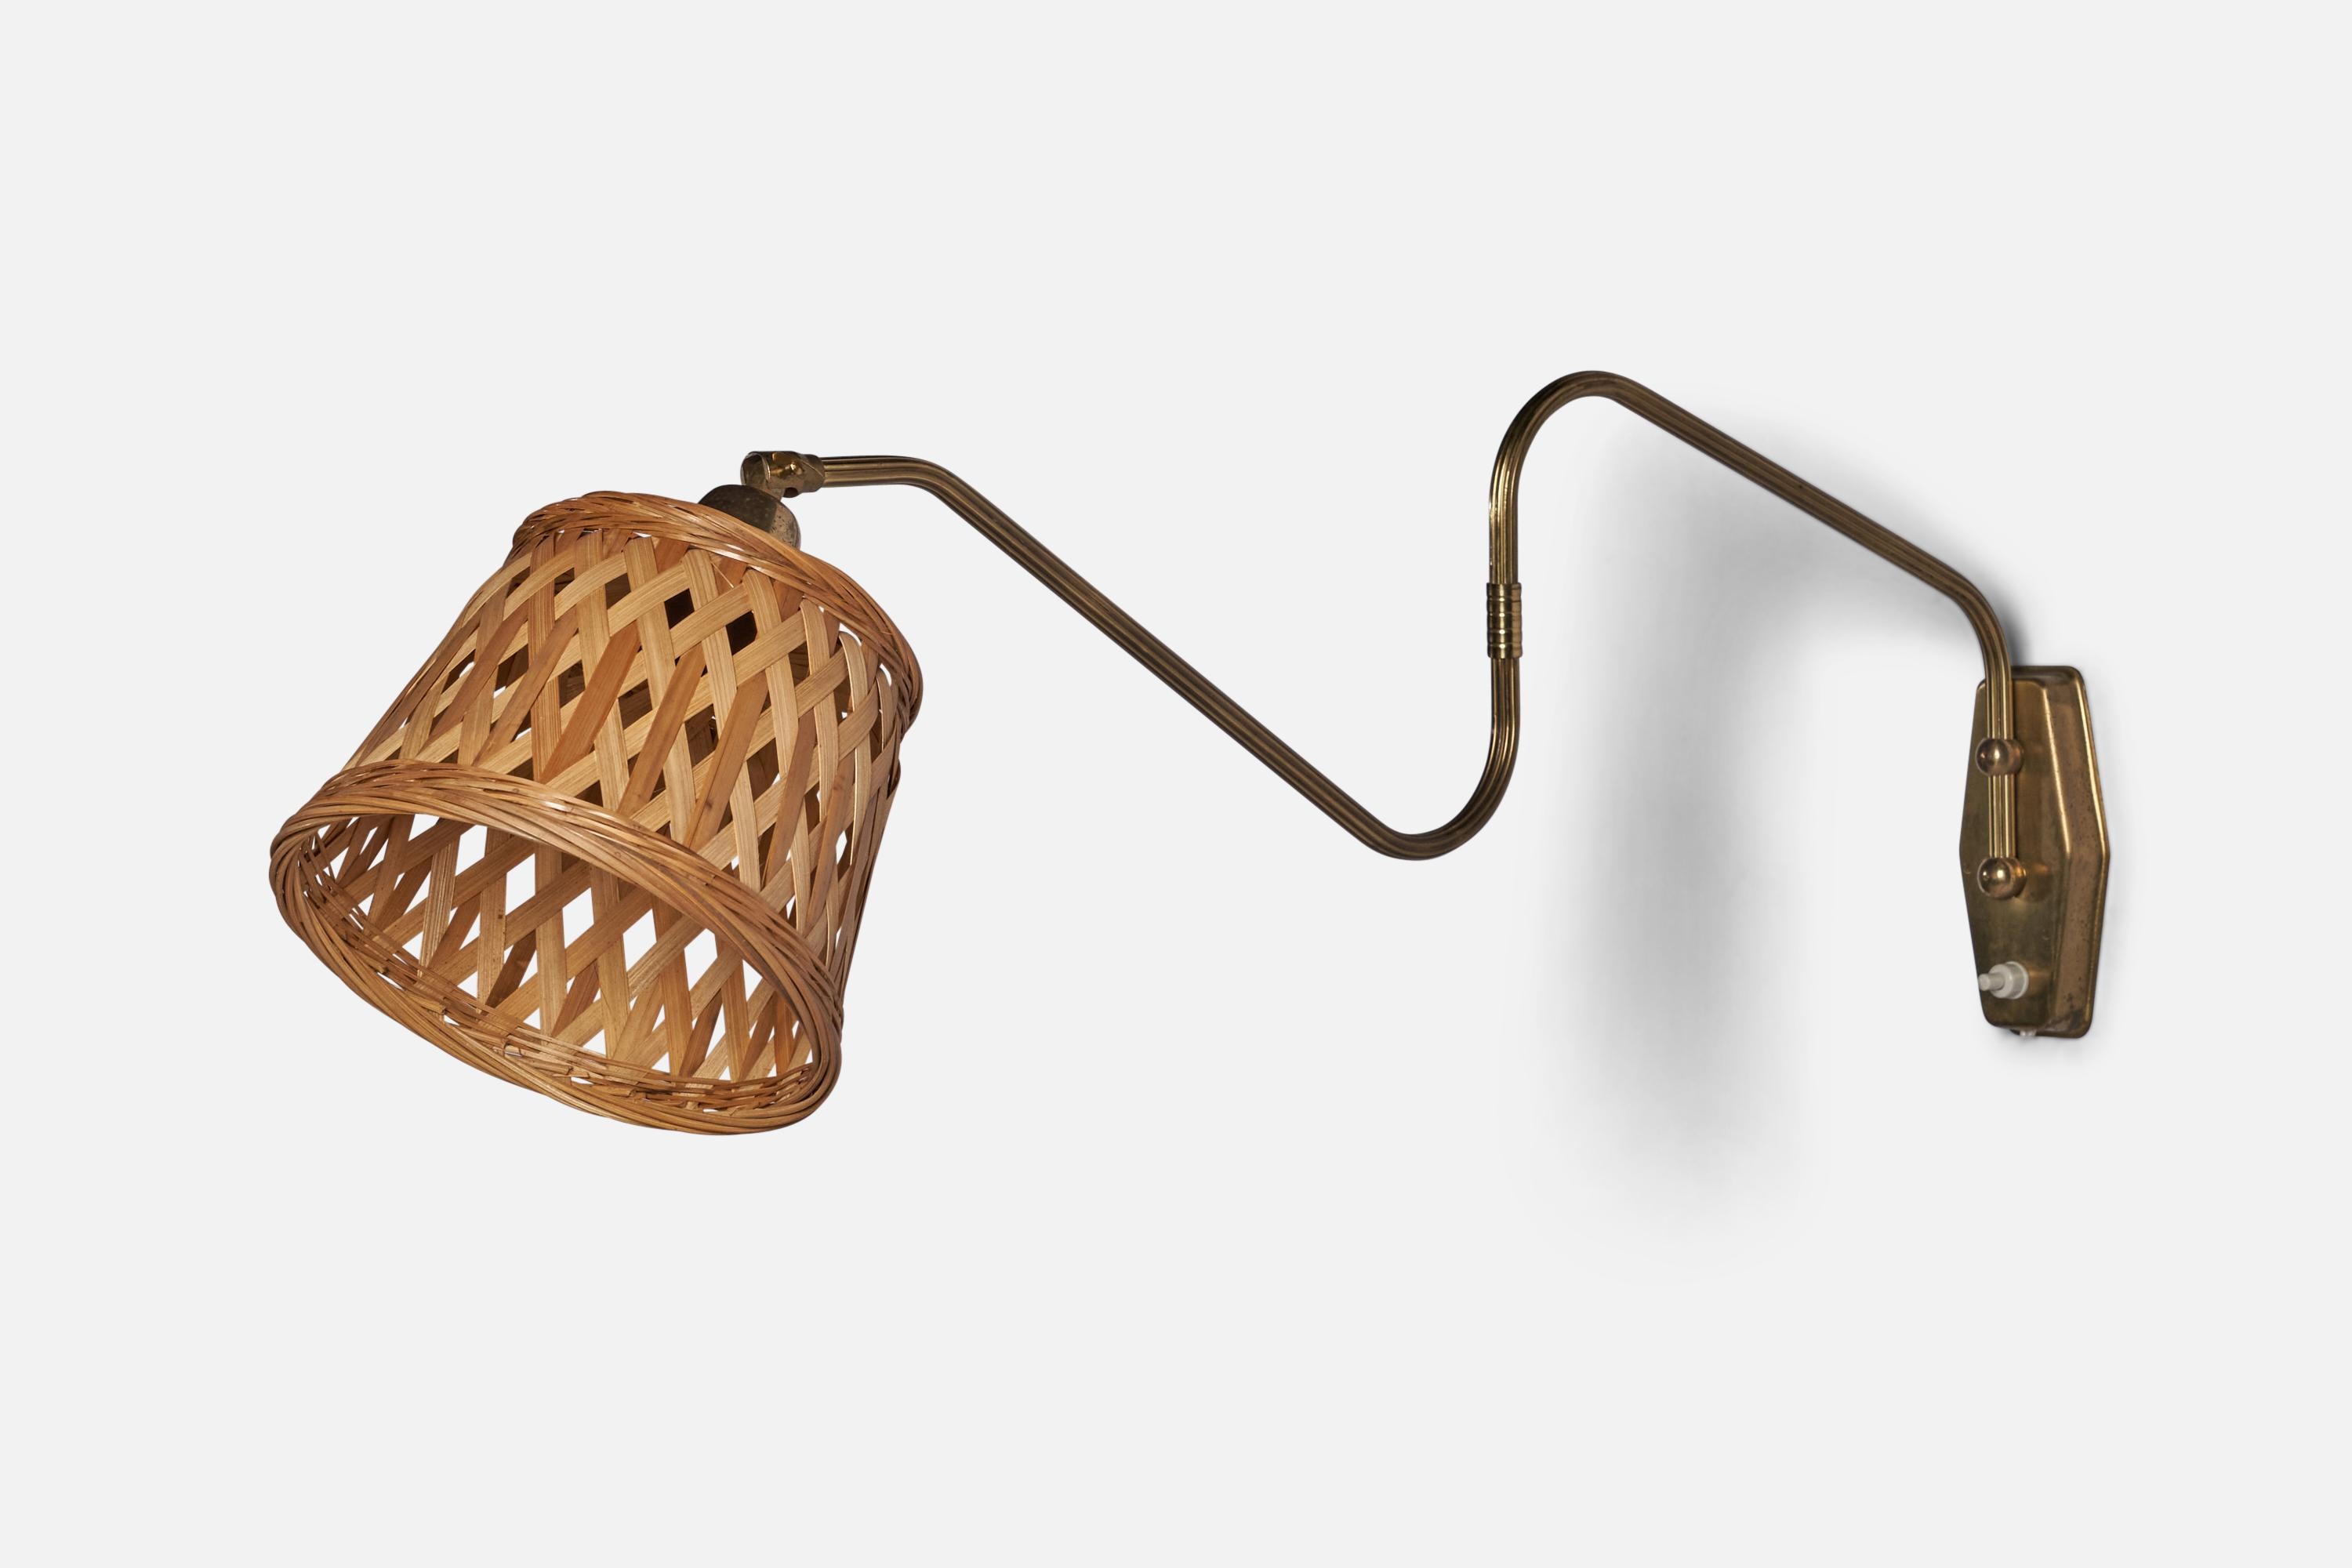 An adjustable brass and rattan wall light designed and produced in Denmark, 1940s.

Overall Dimensions (inches): 15” H x 7” W x 29” D
Back Plate Dimensions (inches): 5.25” H x 2.5” W 
Bulb Specifications: E-26 Bulb
Number of Sockets: 1
All lighting